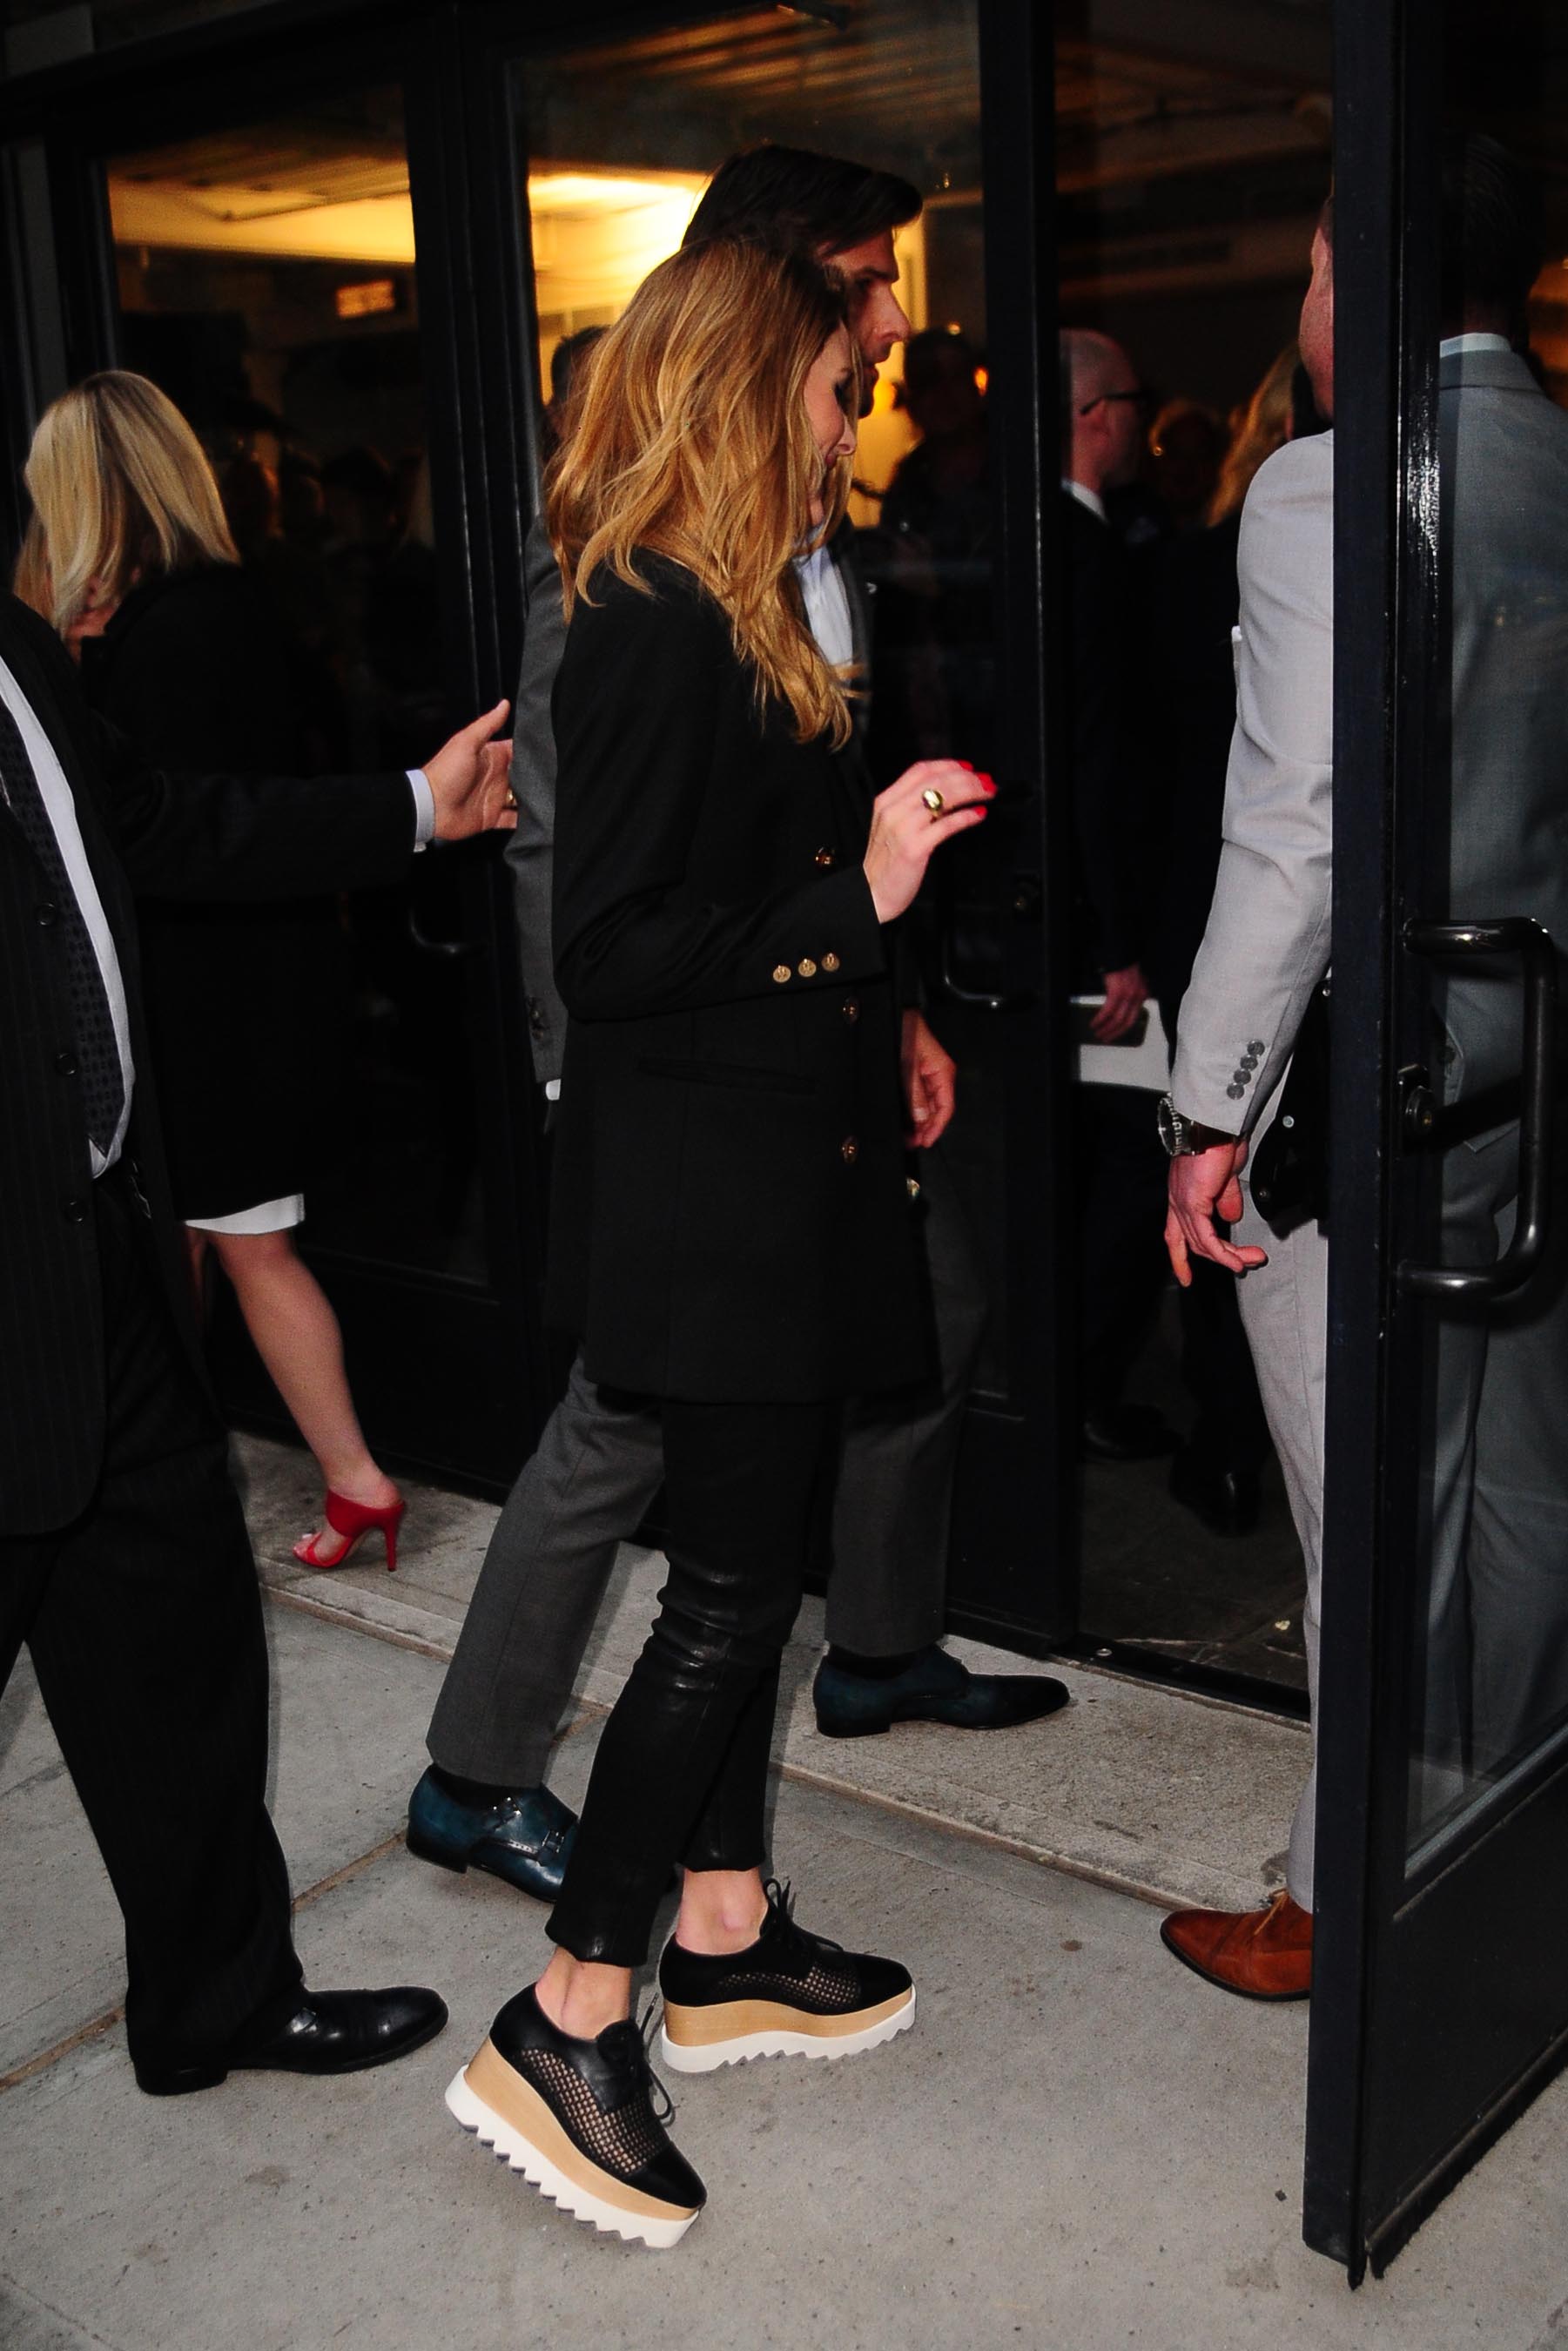 Olivia Palermo arriving at the premiere of Mother’s Day